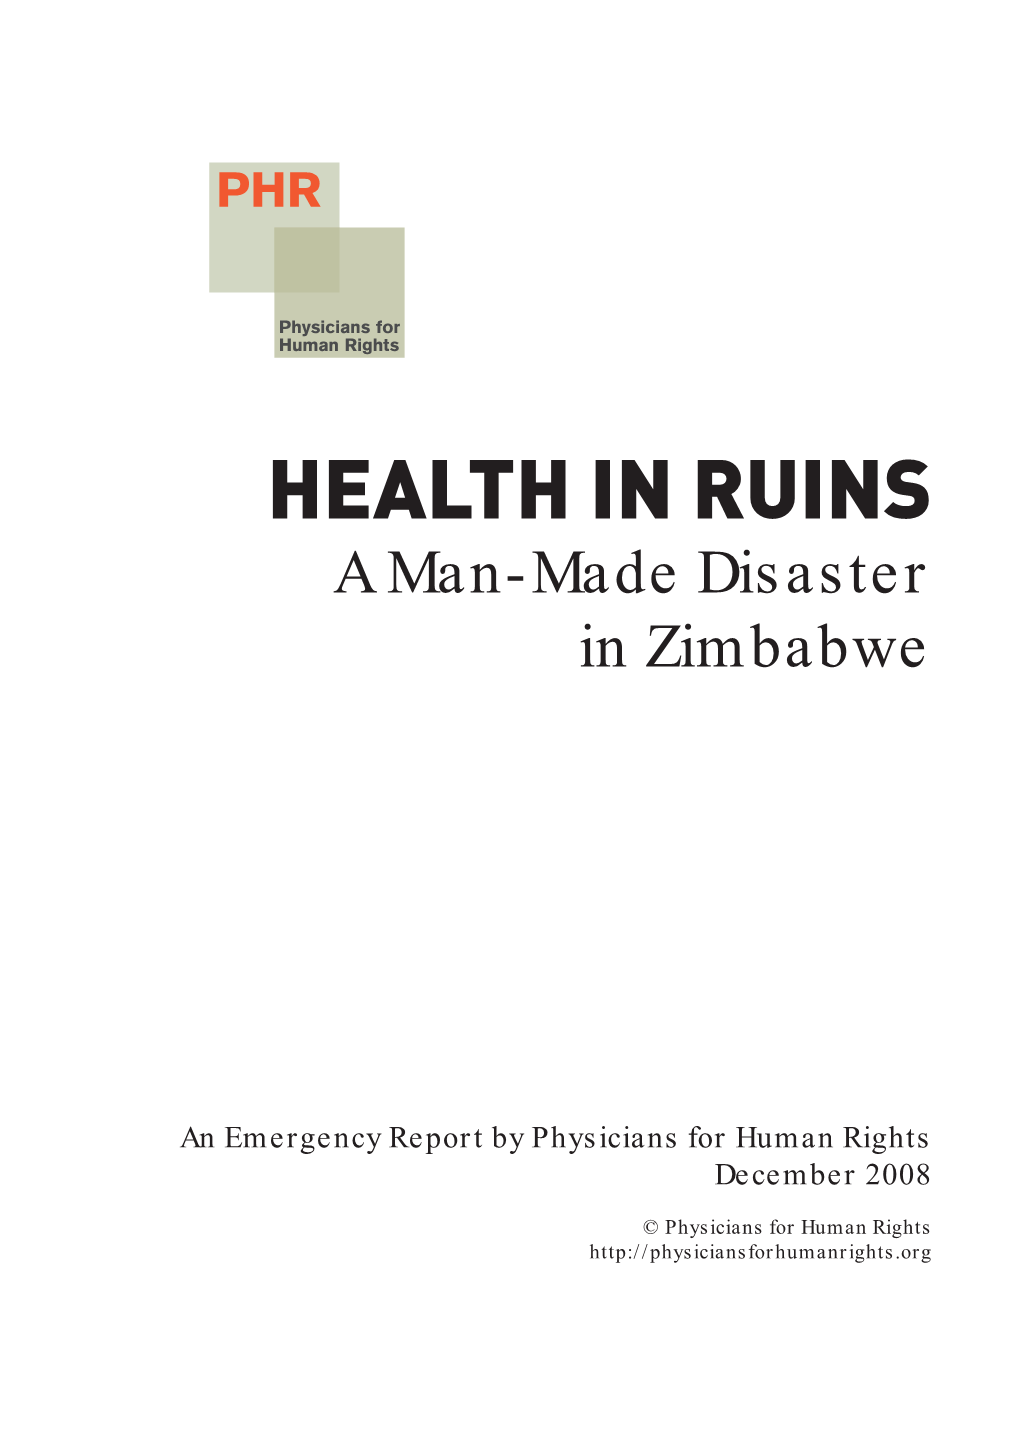 HEALTH in RUINS a Man-Made Disaster in Zimbabwe